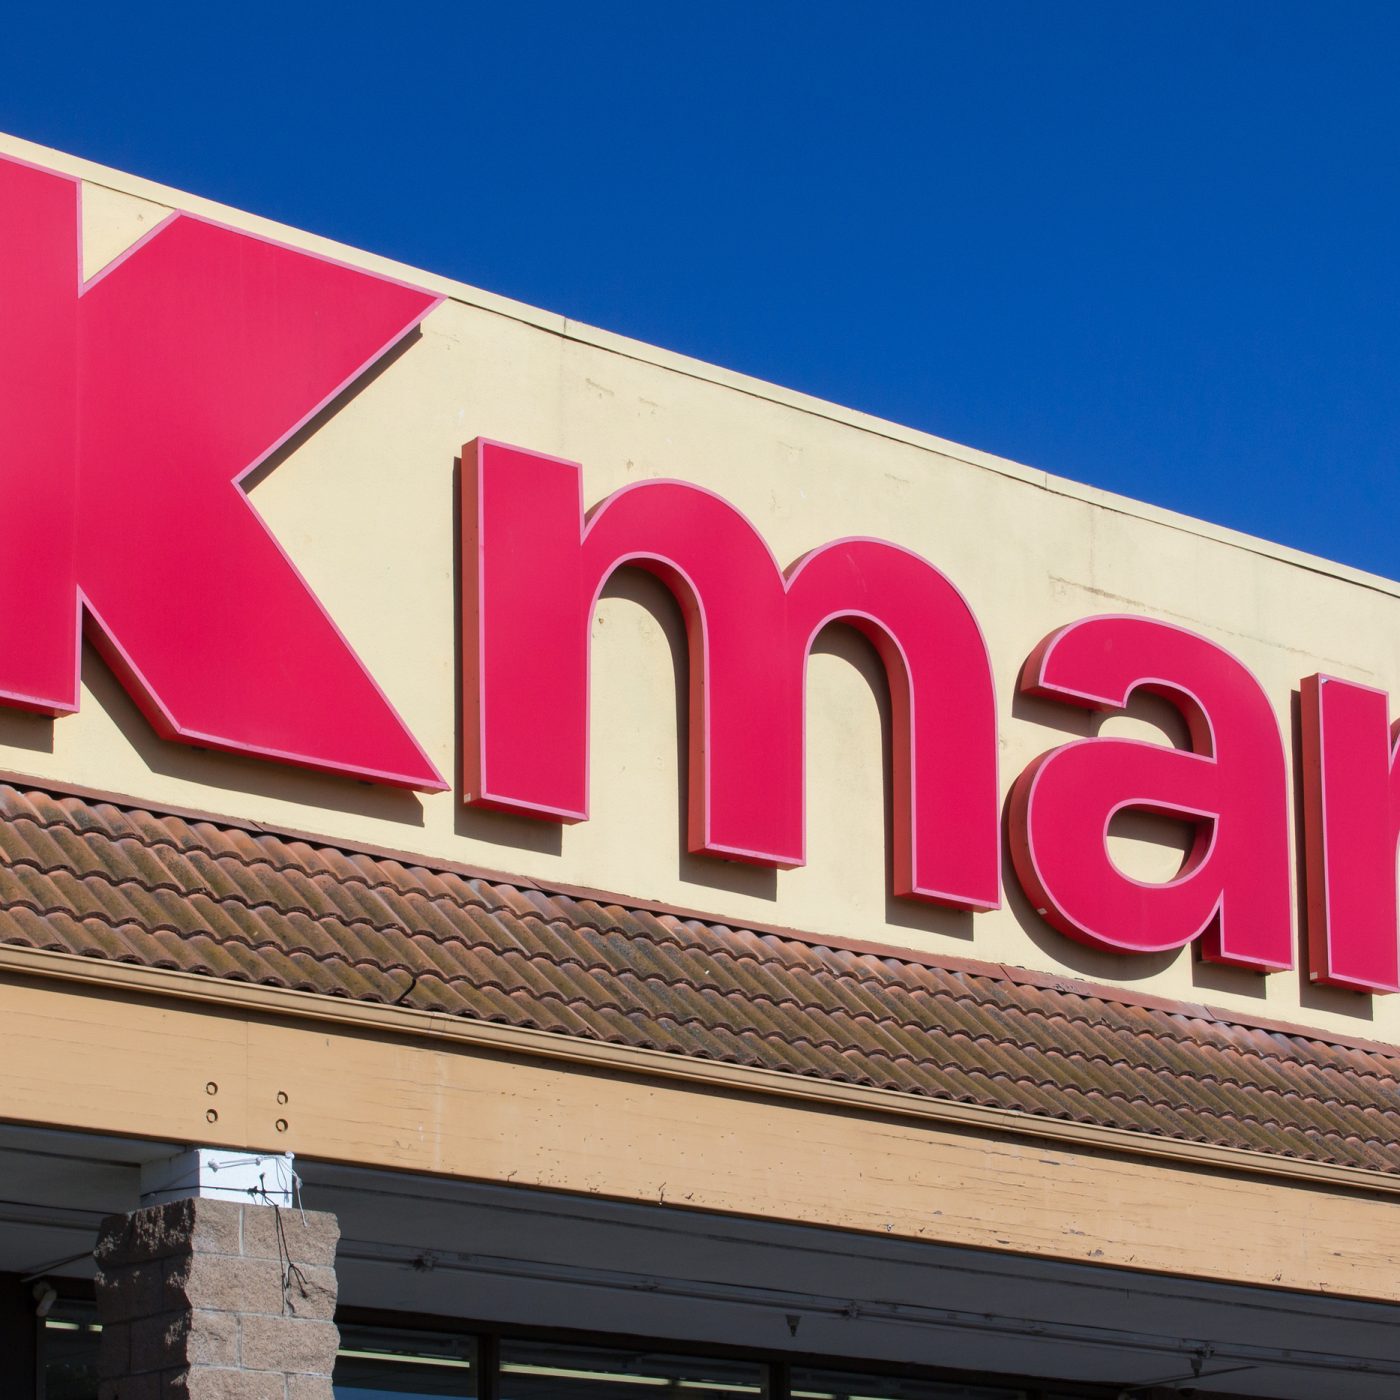 Internet loses it over man's 31-year-old Kmart receipt find